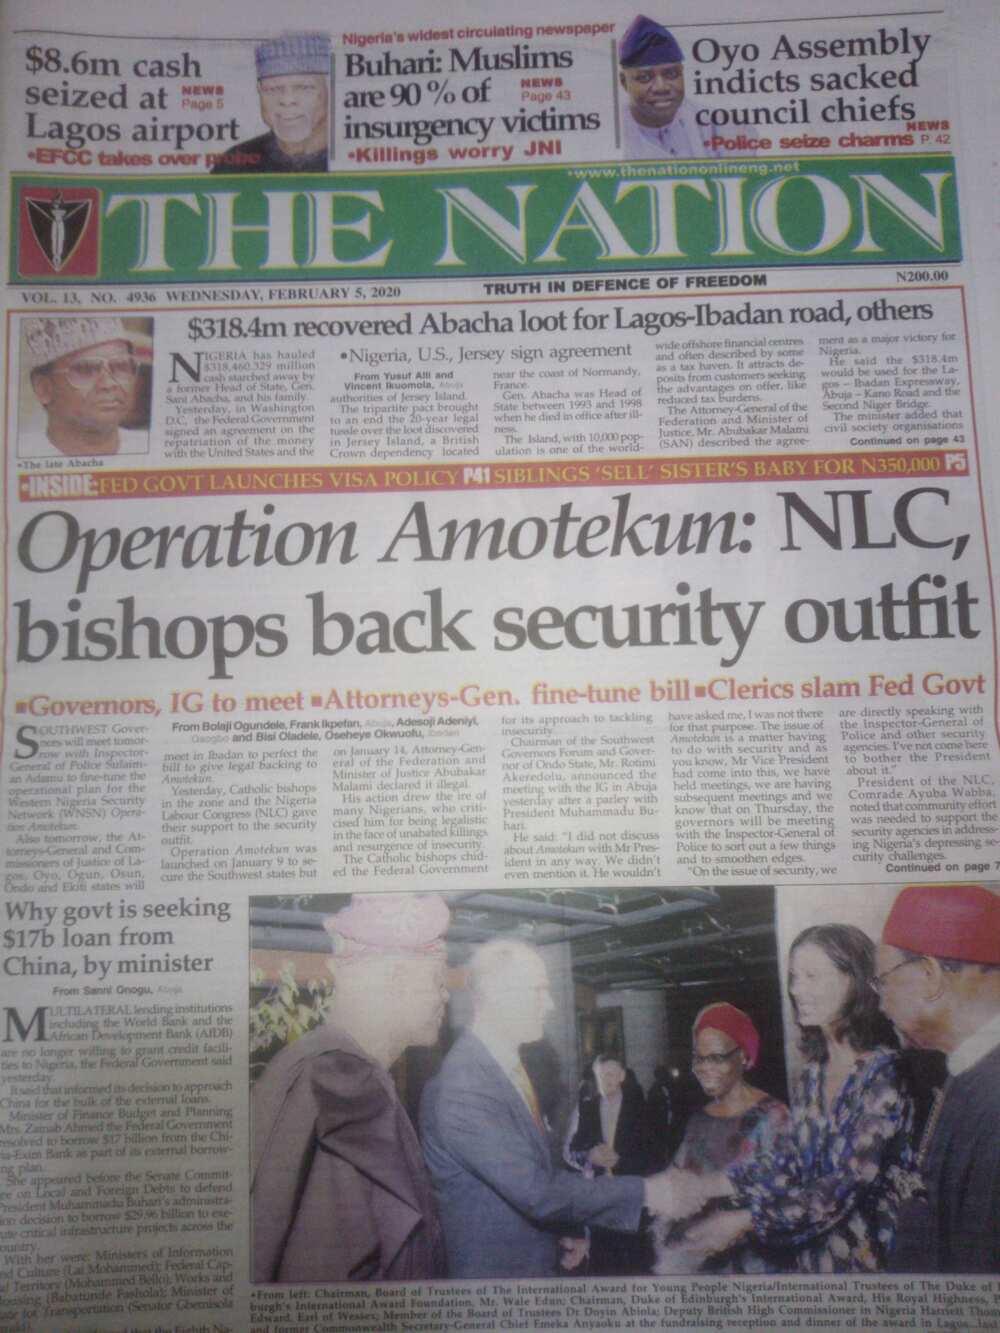 The Nation newspaper review of February 5